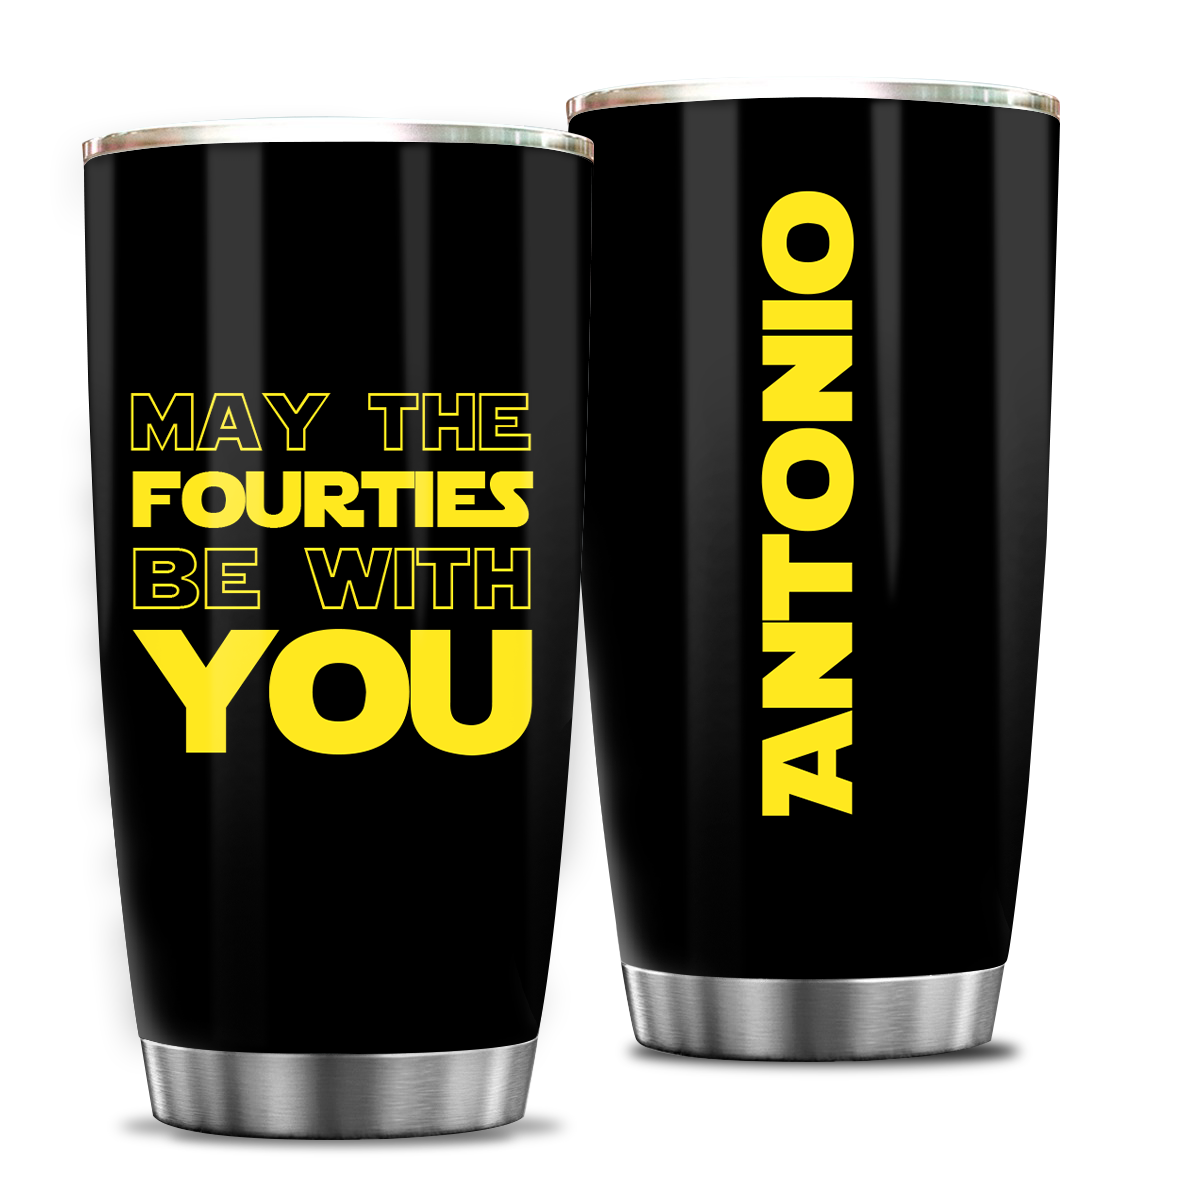 40th Birthday Black Tumbler May The Fourties Be With You Custom Gifts Men Women Stainless Steel Tumbler - Personalized Stainless Steel Tumbler